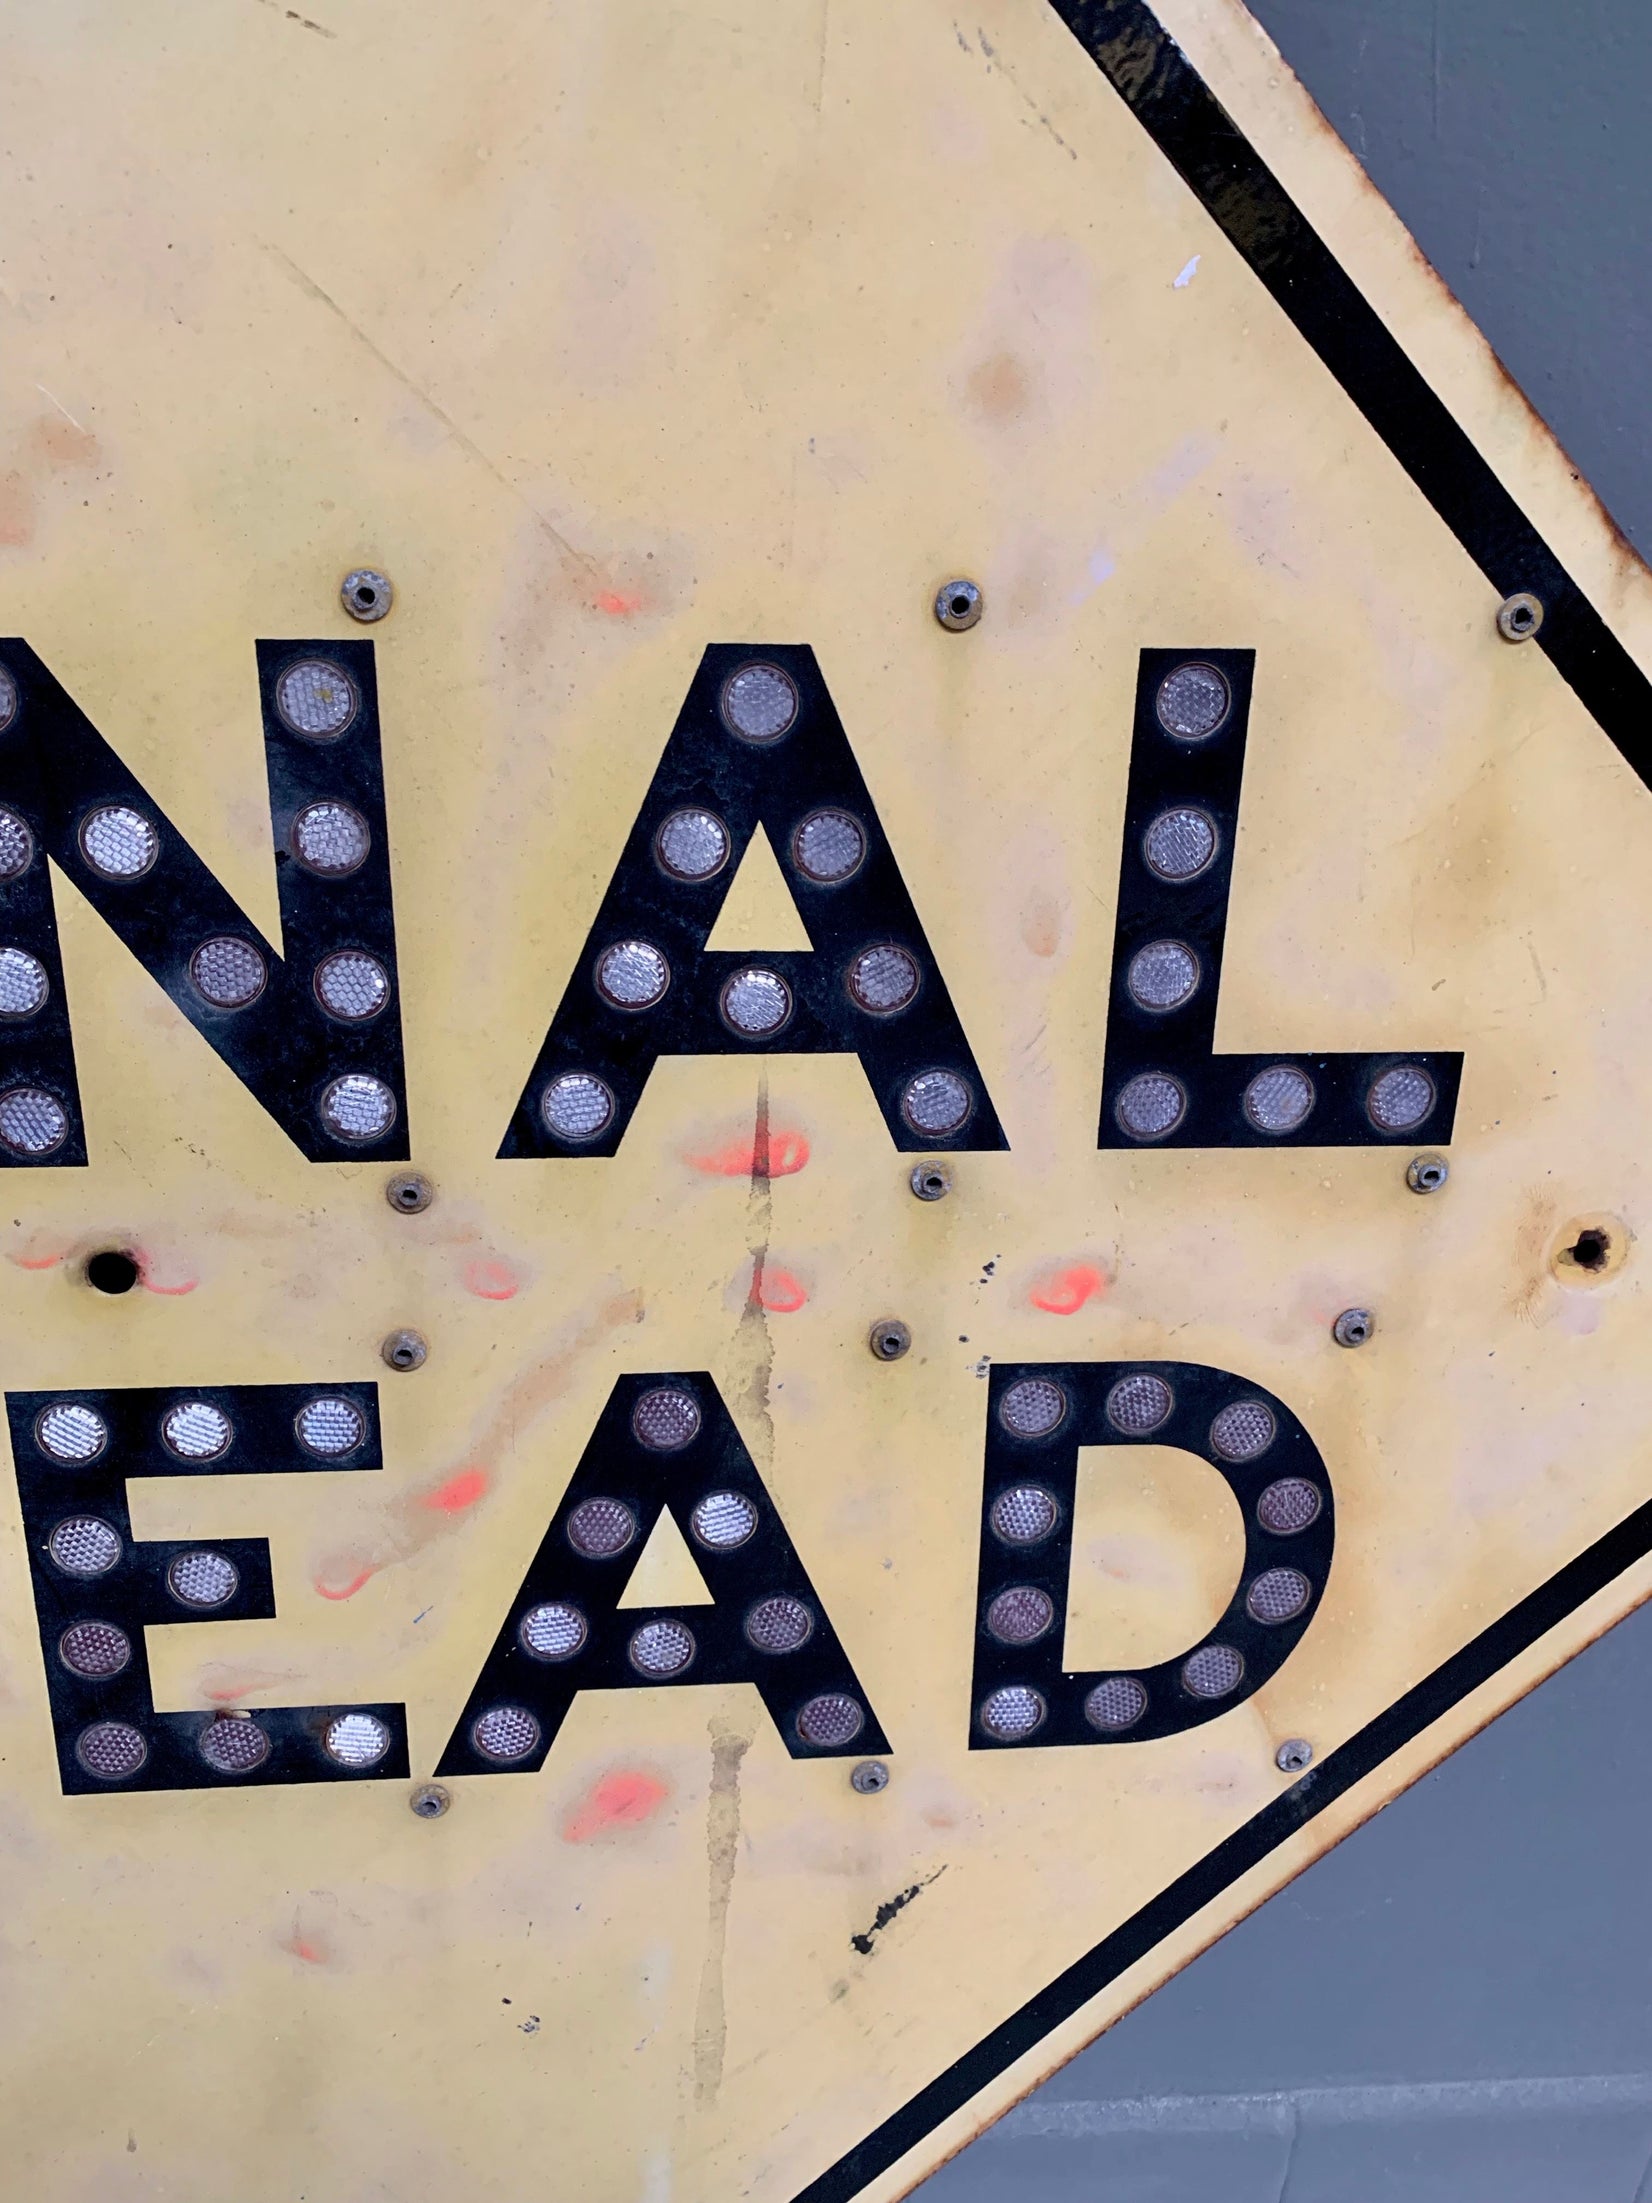 1959 California Highway 'Signal Ahead' Sign with Reflectors